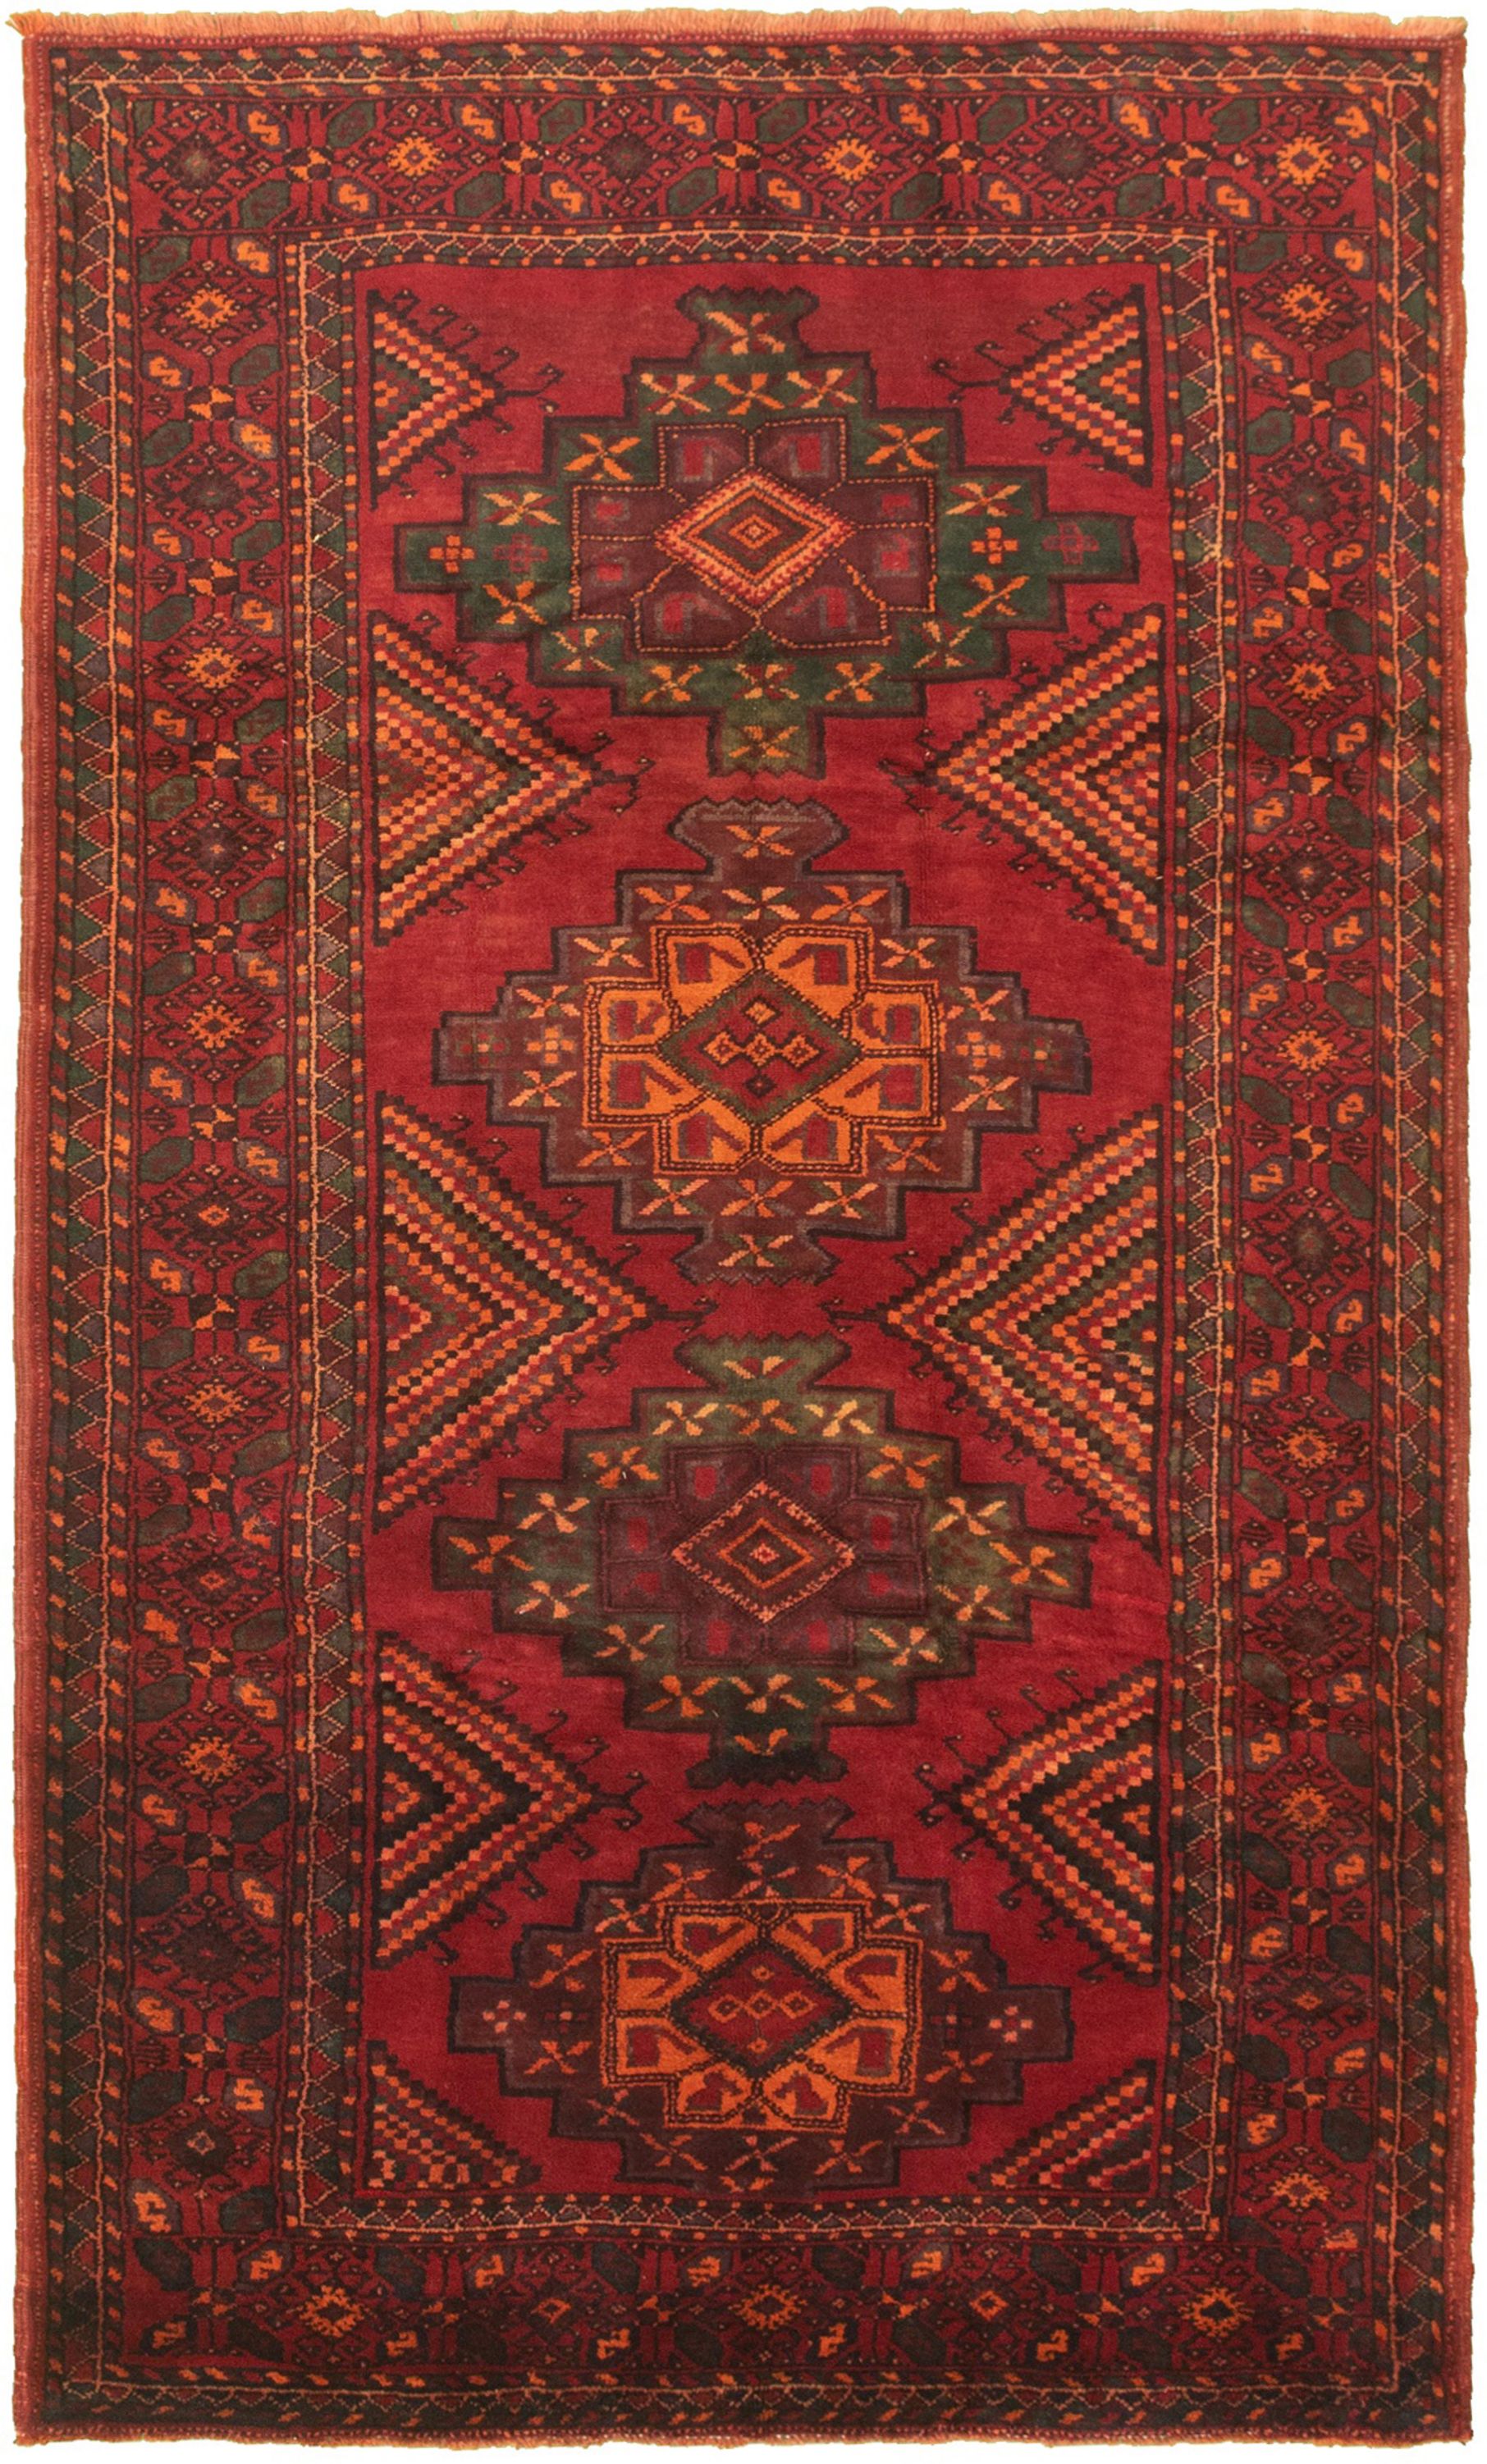 Hand-knotted Authentic Turkish Red Wool Rug 5'4" x 9'6"  Size: 5'4" x 9'6"  